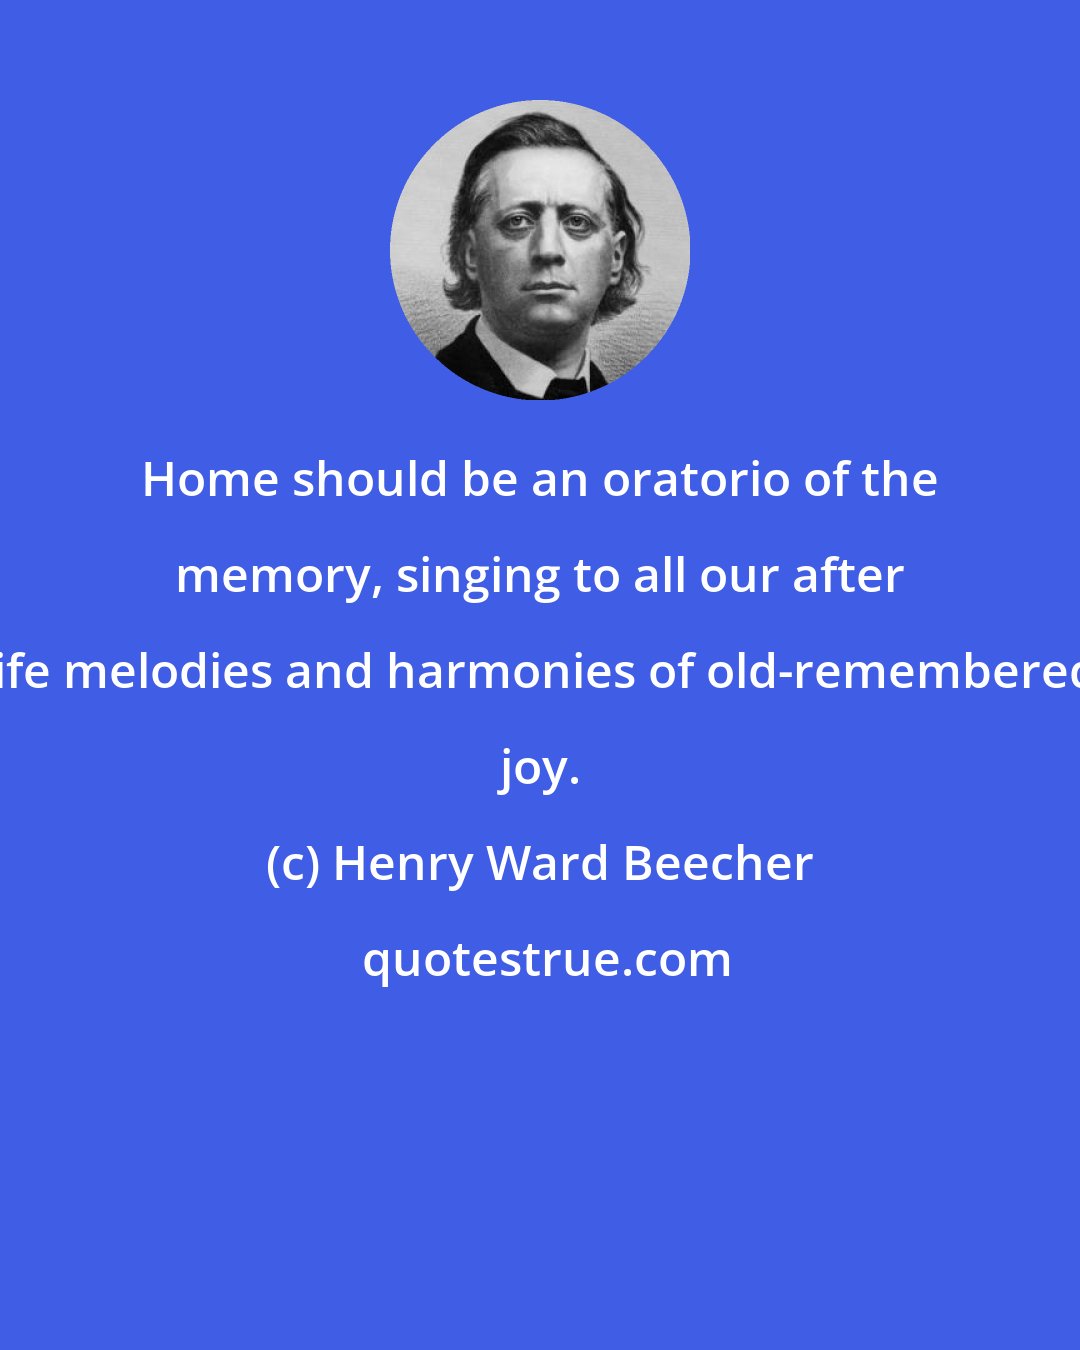 Henry Ward Beecher: Home should be an oratorio of the memory, singing to all our after life melodies and harmonies of old-remembered joy.